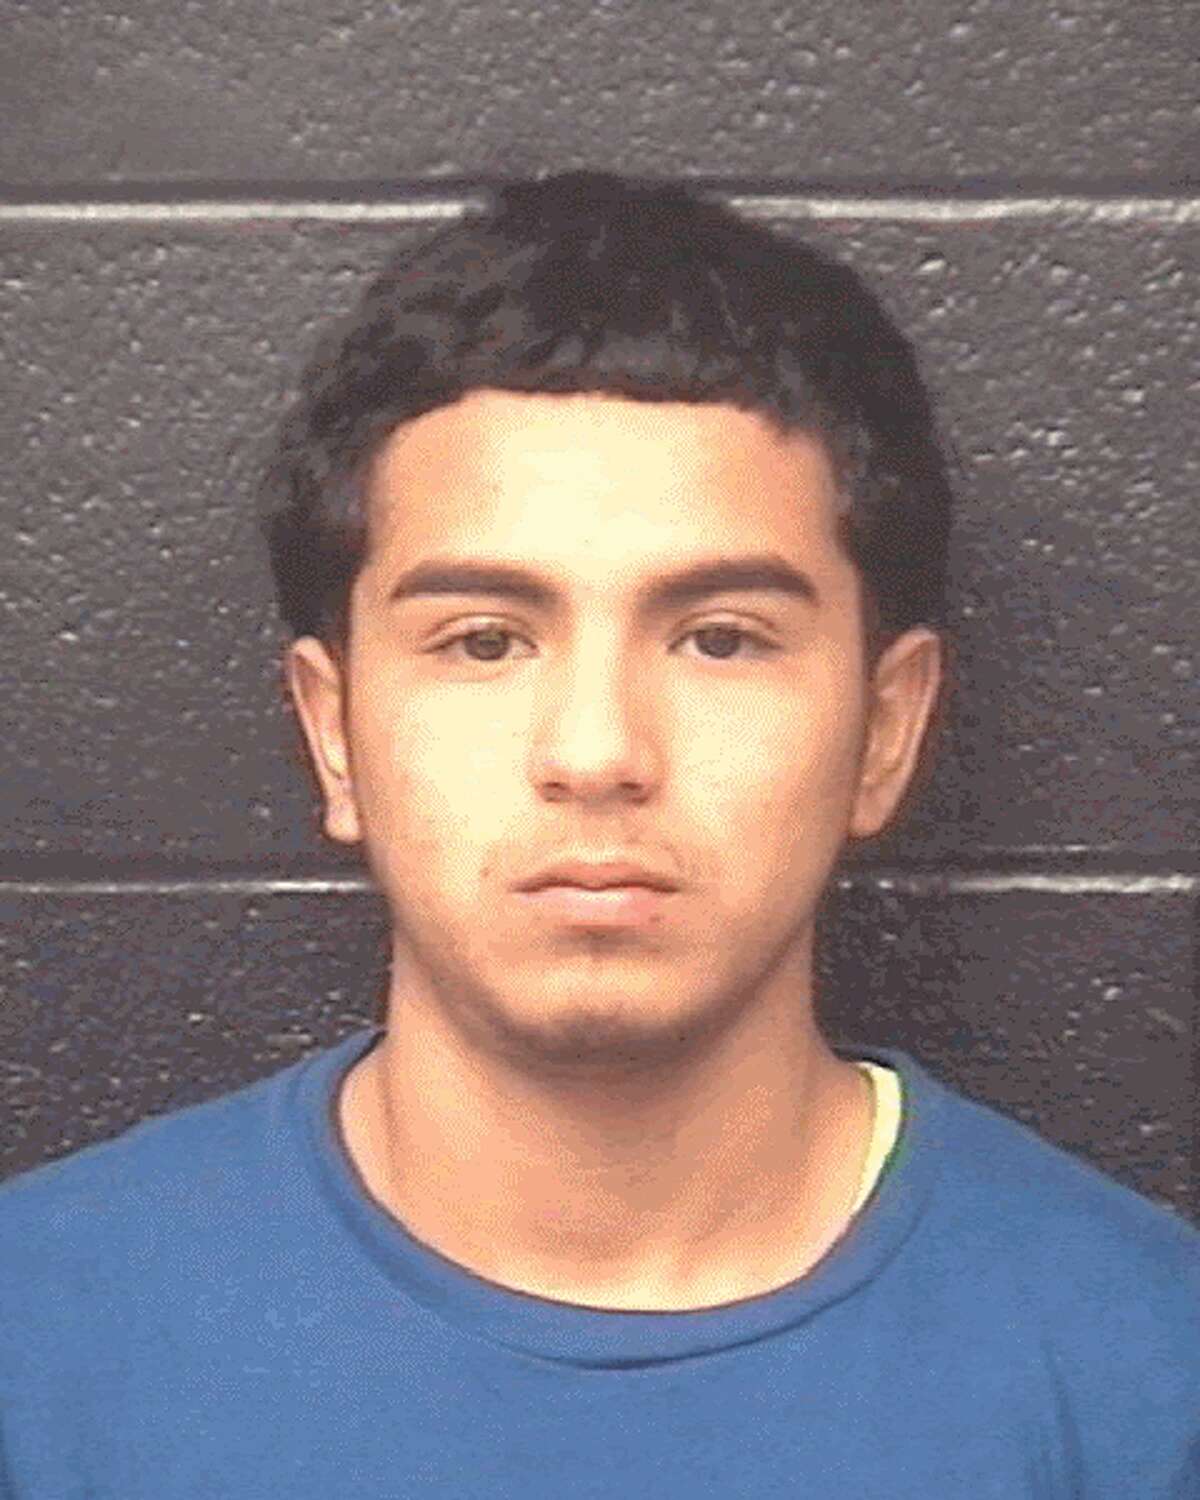 ALVARADO, RODOLFO (W M) (18) years of age was arrested on the charge of THEFT PROP>=$100